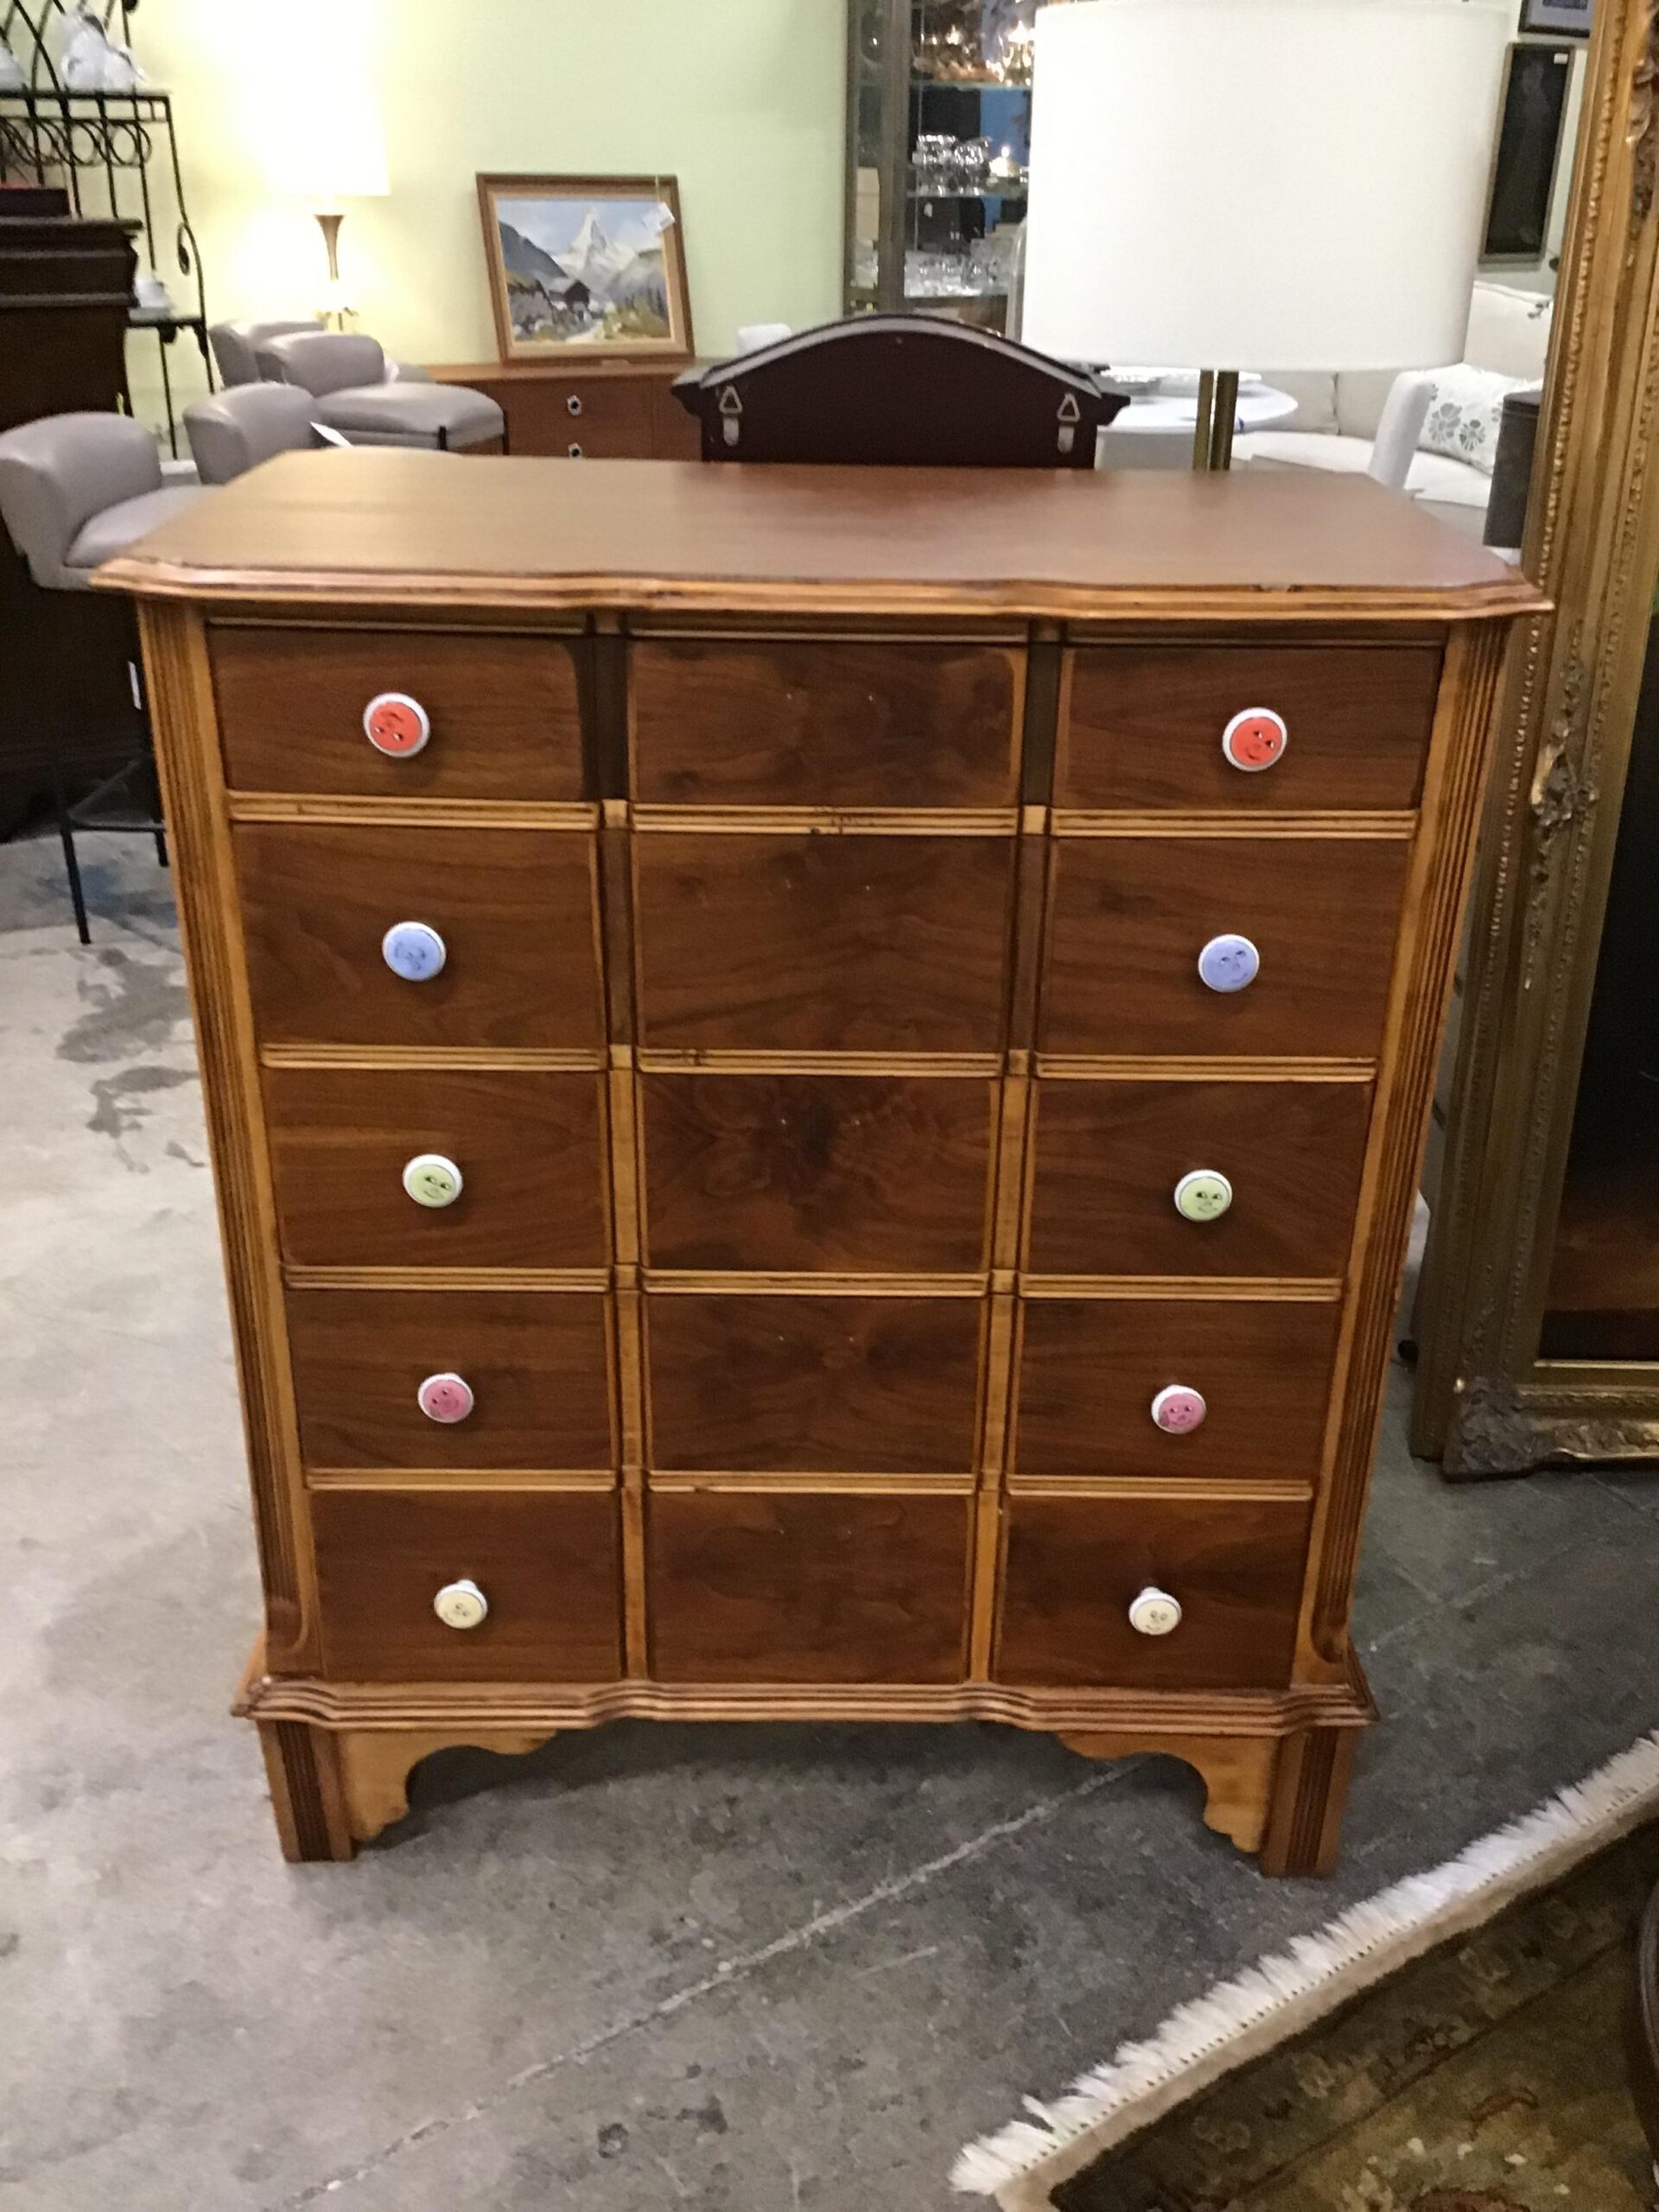 Dresser with 6 drawers